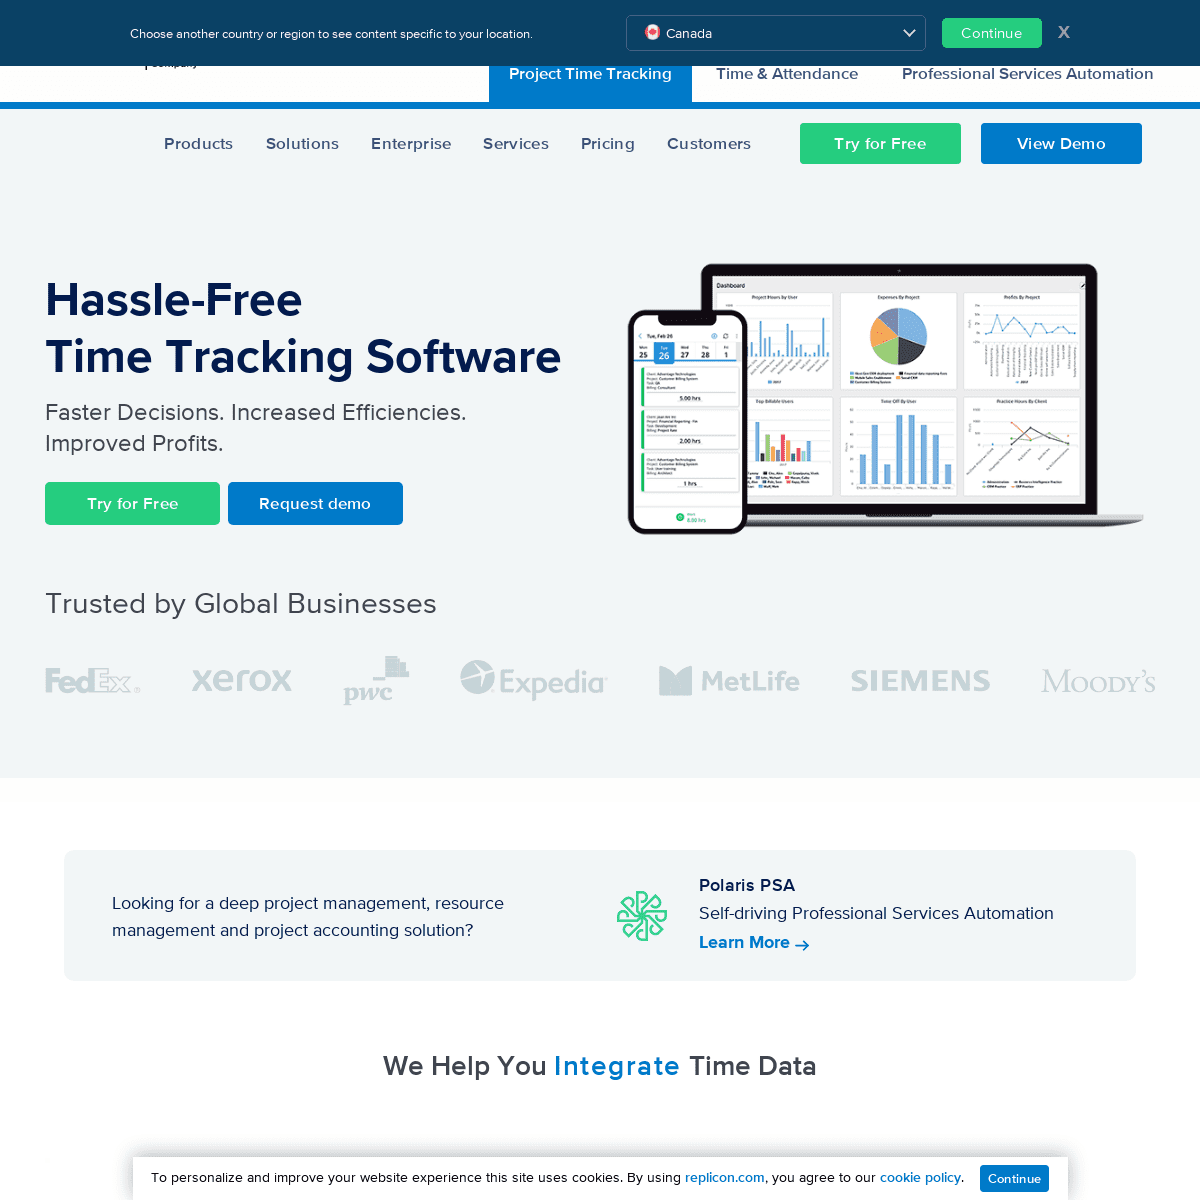 A complete backup of https://replicon.com